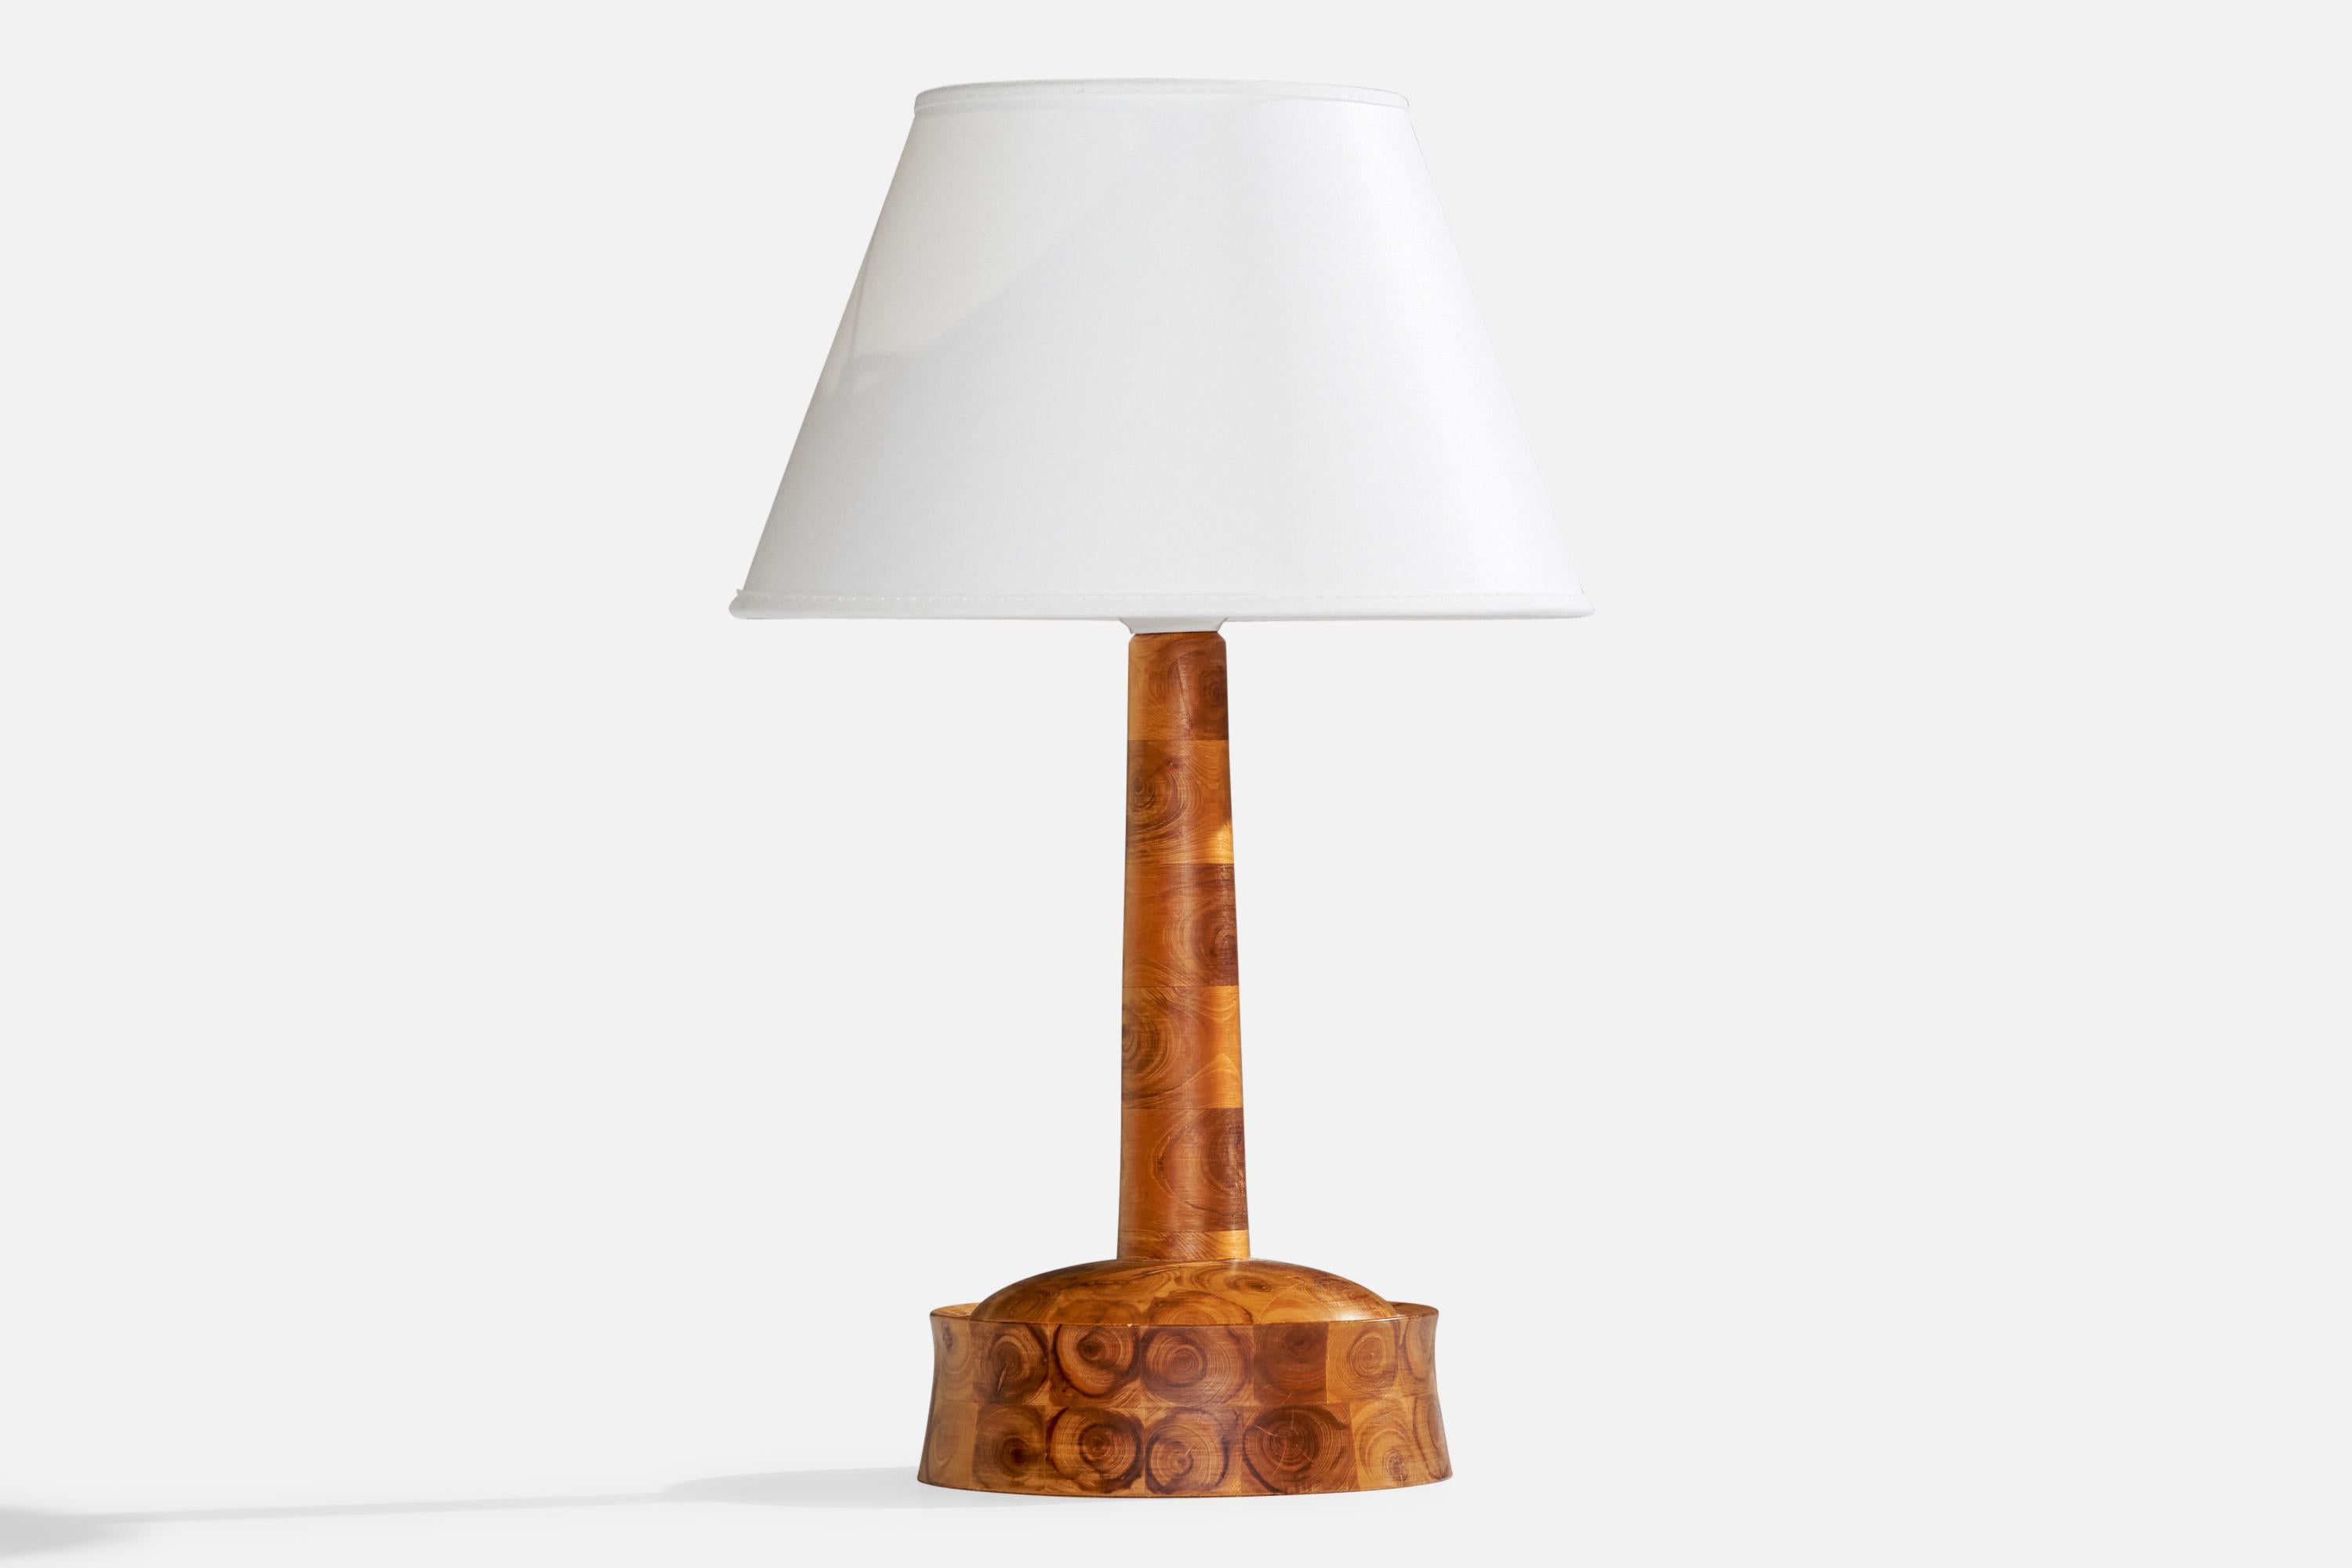 A stack-laminated wood table lamp designed and produced in Sweden, c. 1970s.

Dimensions of Lamp (inches): 10.5” H x 5” Diameter
Dimensions of Shade (inches): 4.5” Top Diameter x 8”  Bottom Diameter x 5.25” H
Dimensions of Lamp with Shade (inches):